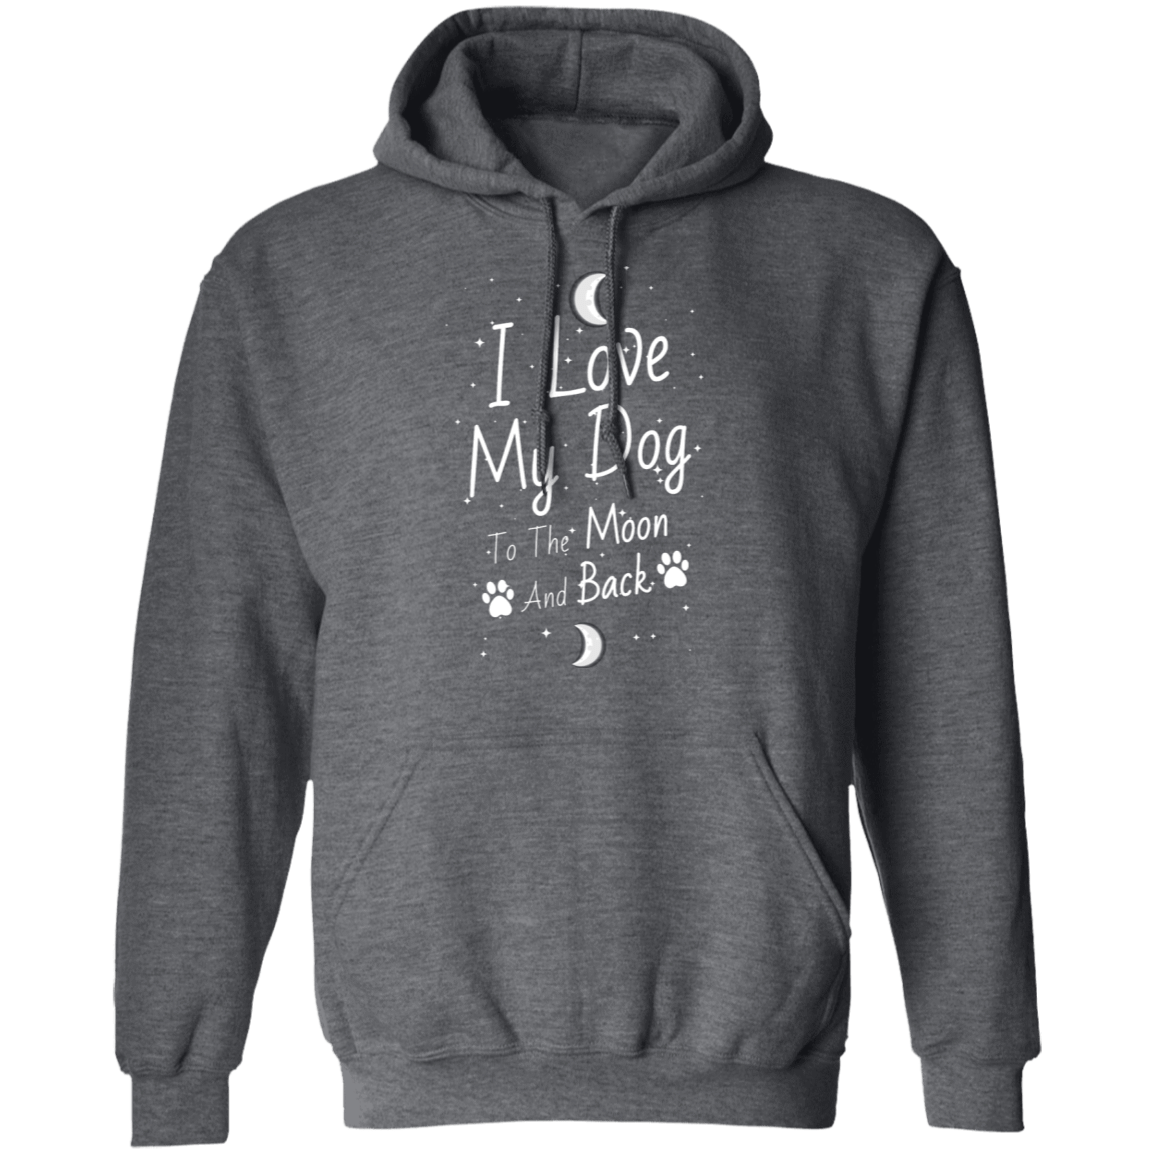 Moon And Back - Hoodie.